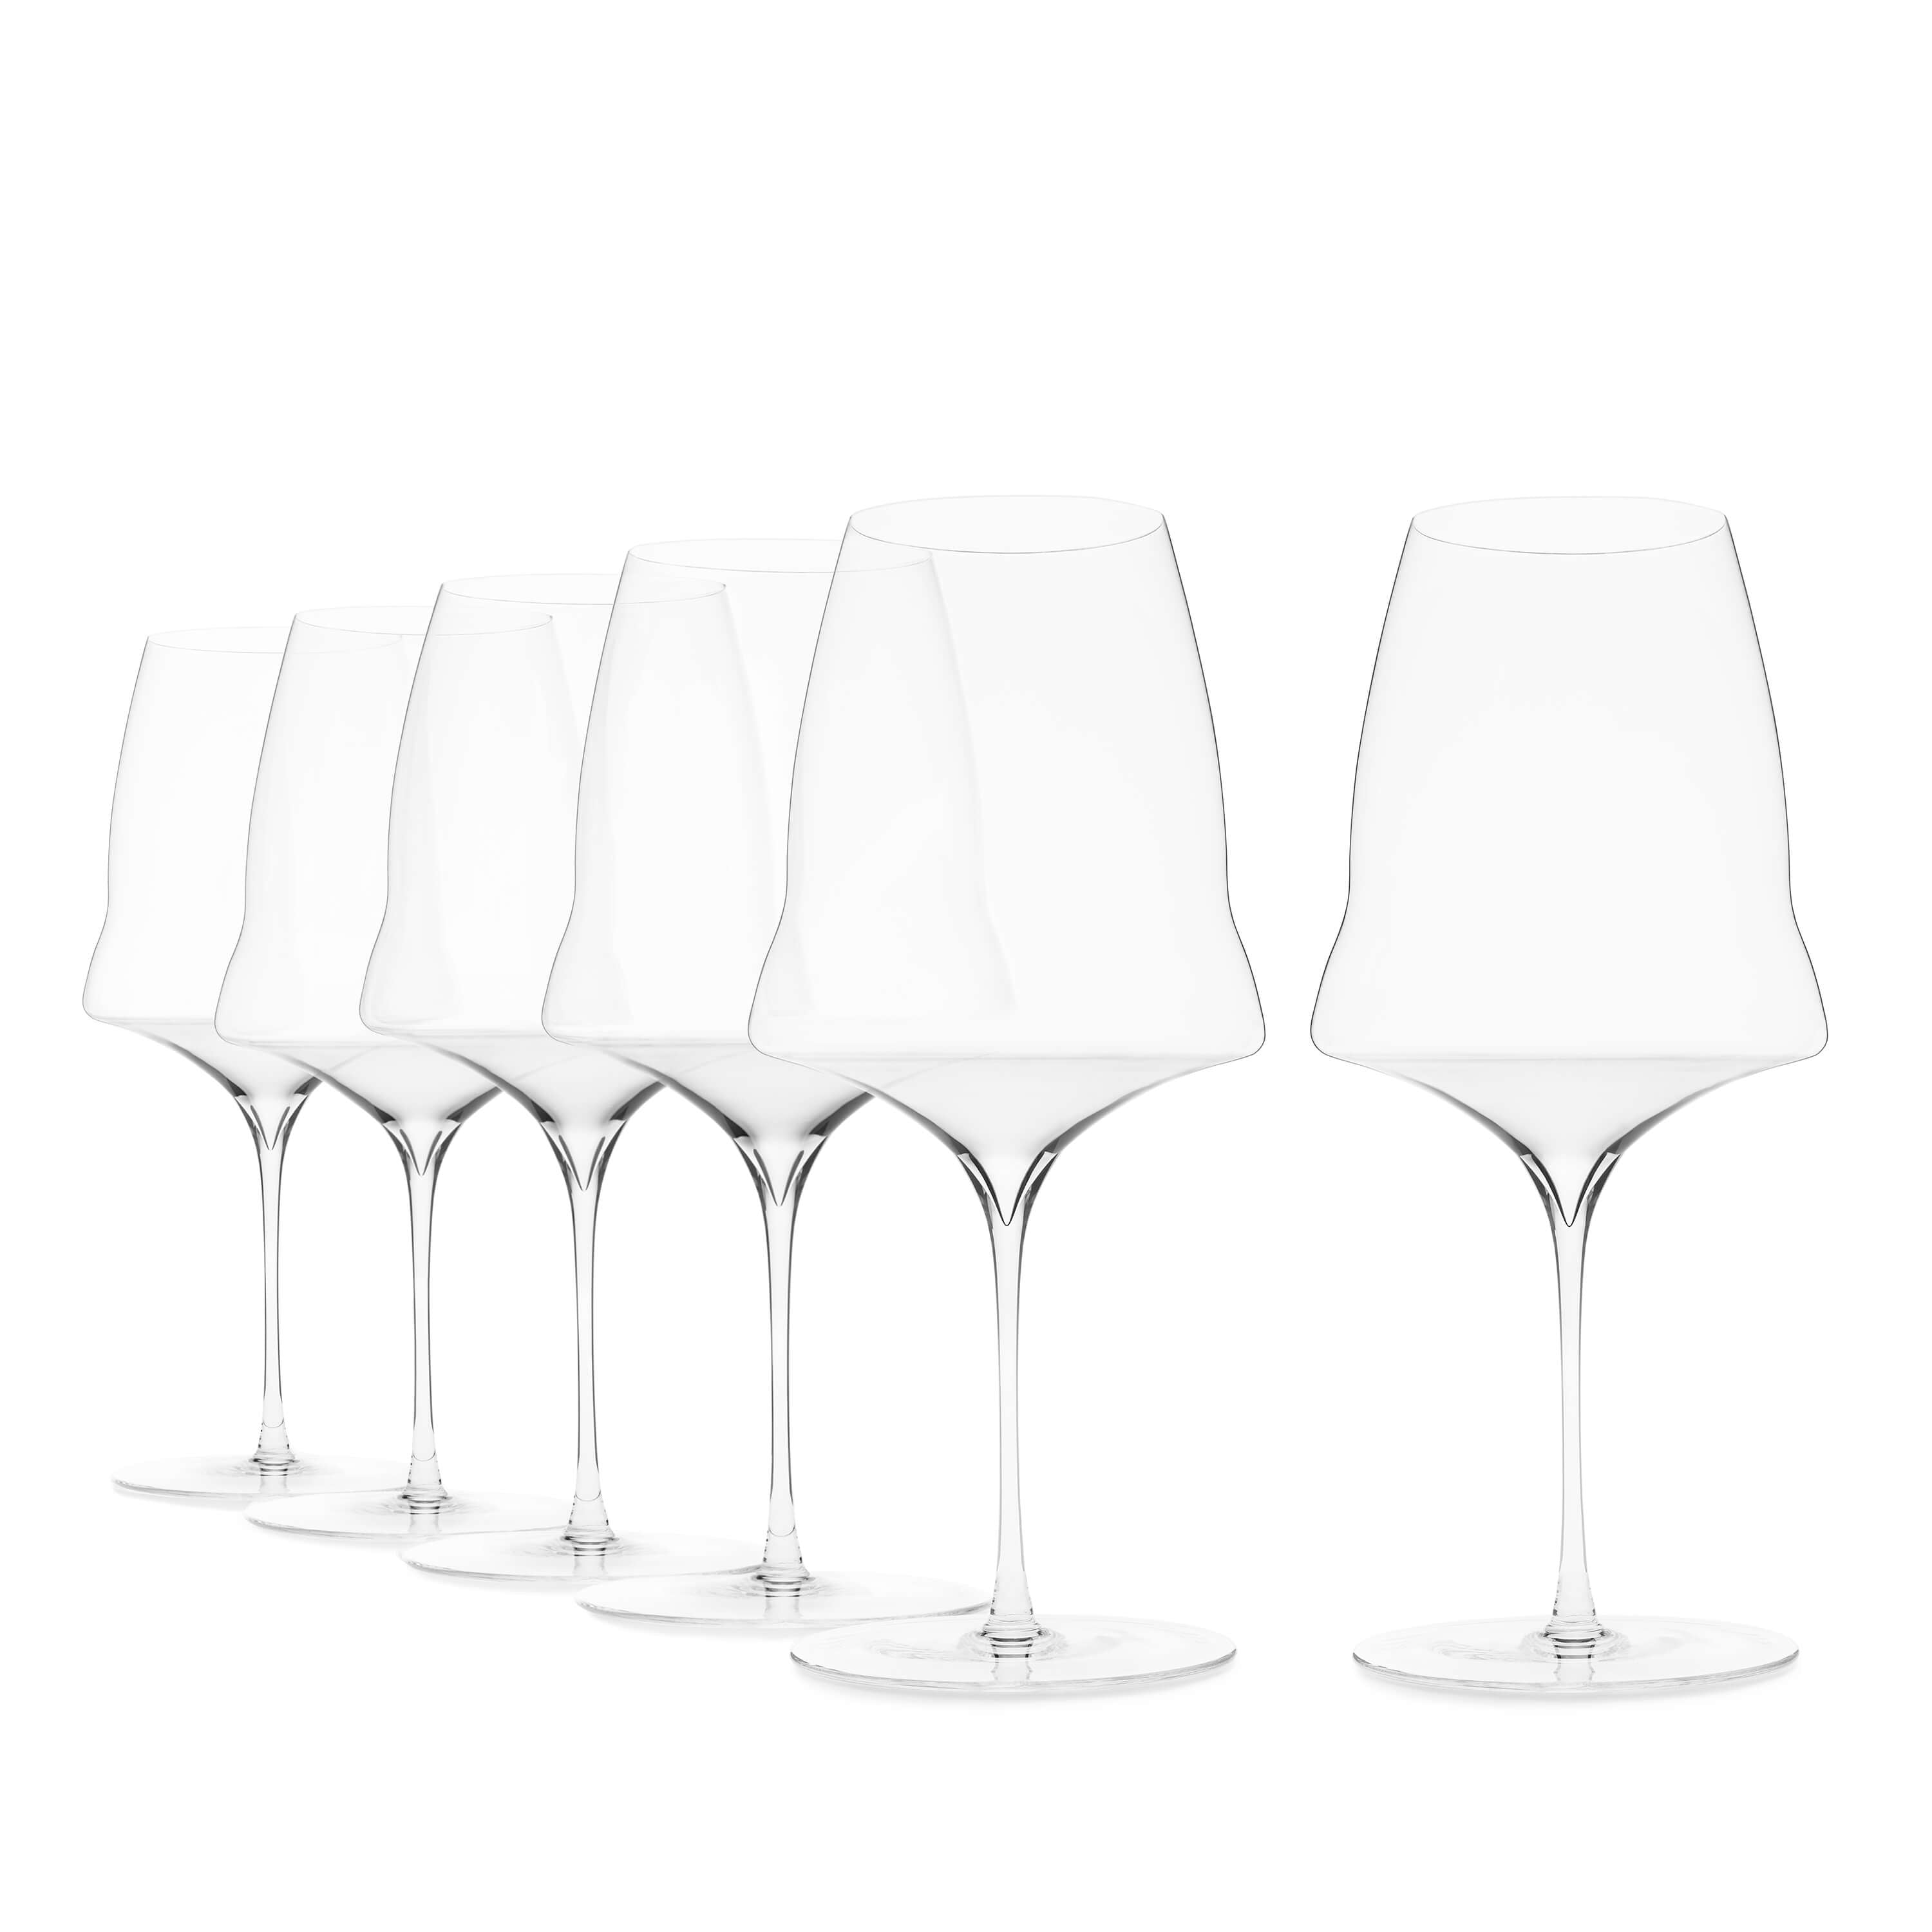 Set of 6 red wine glasses by Josephinenhütte